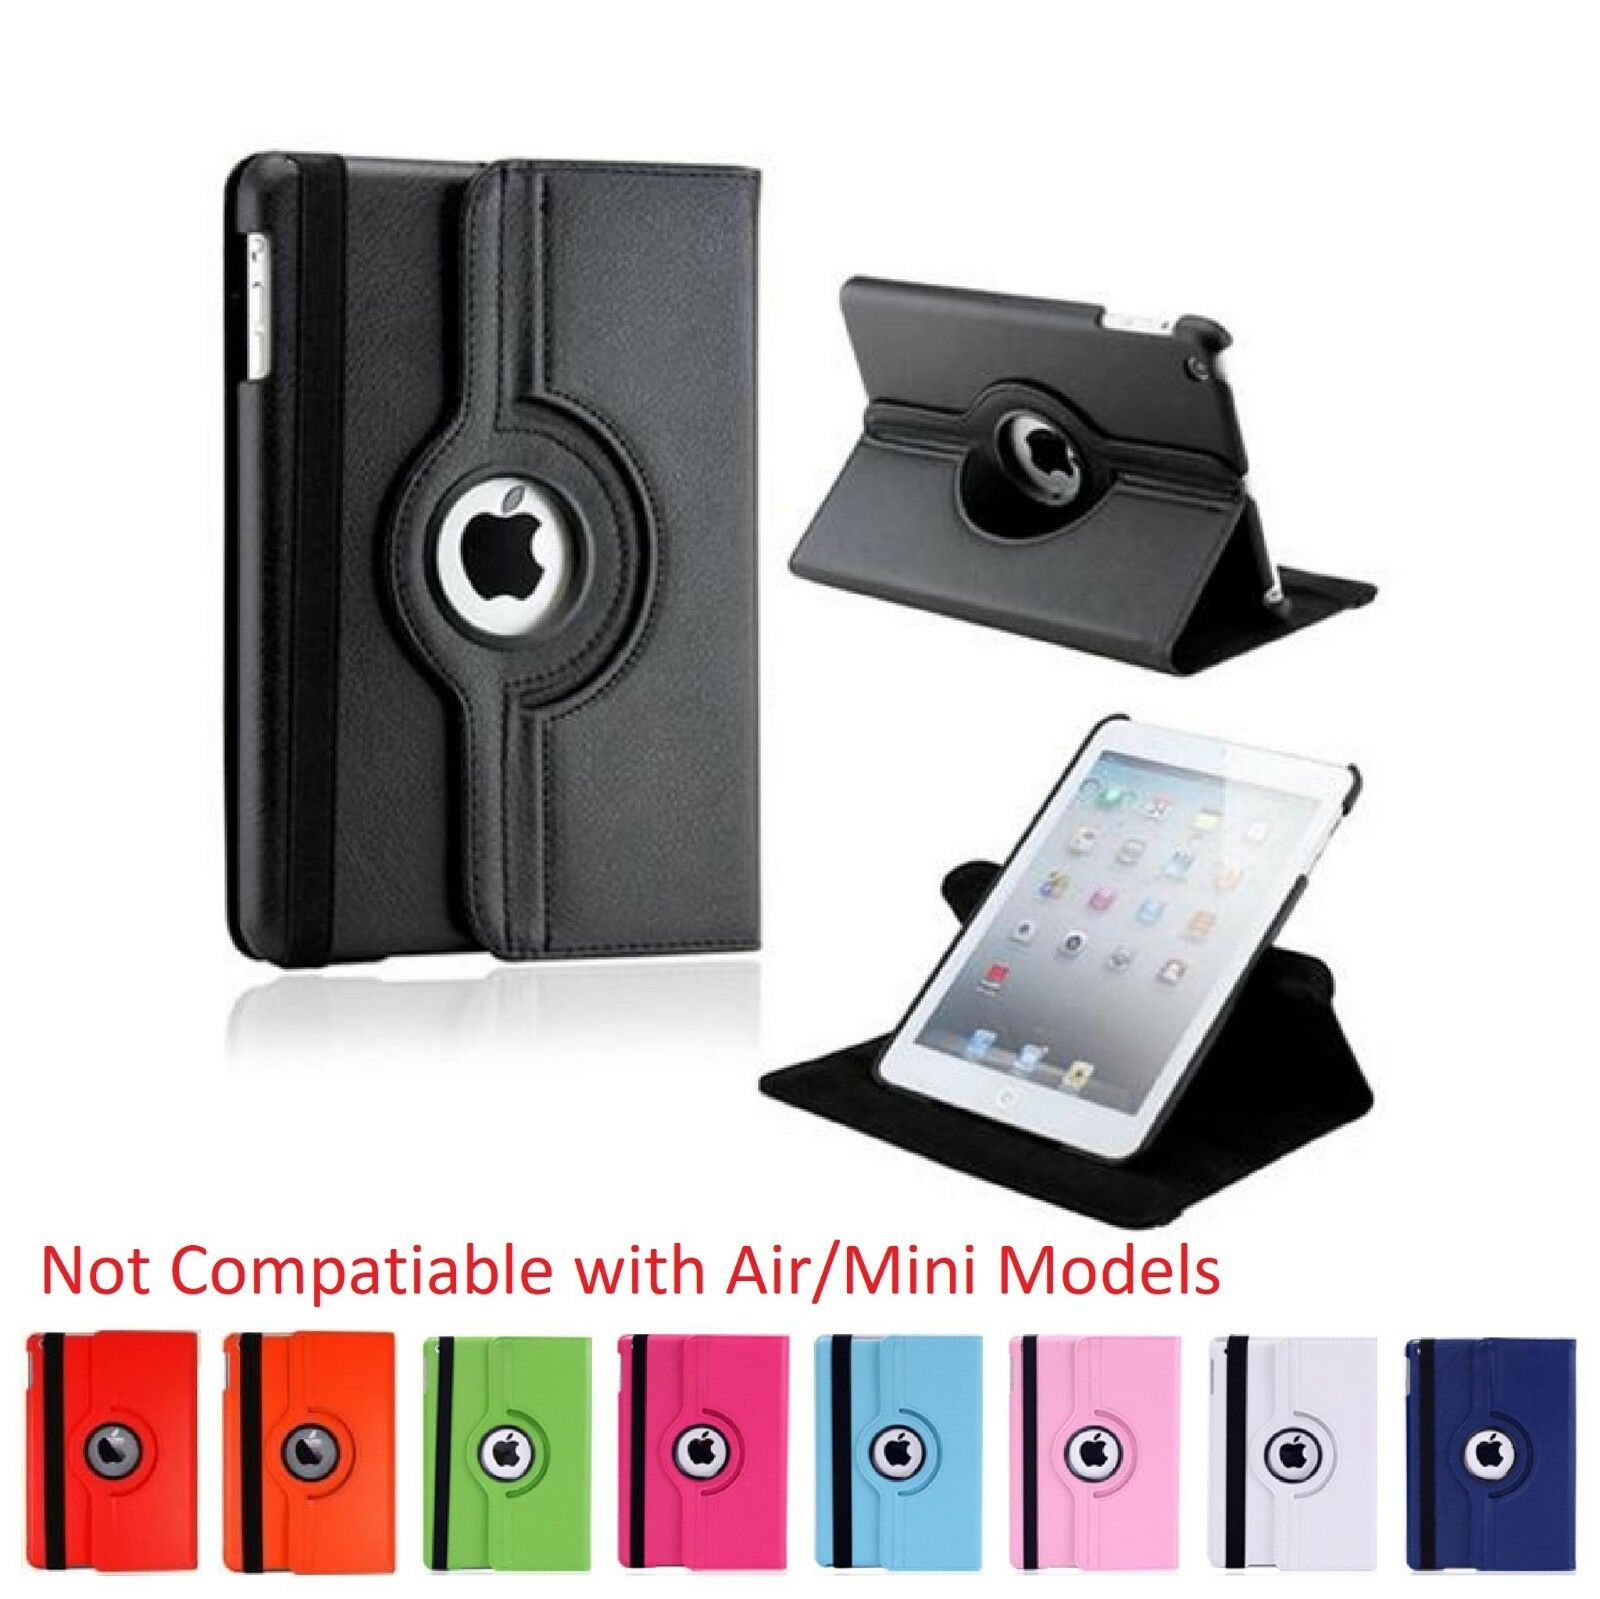 Leather Case And Cover Stand For Apple Ipad 2 / 3 / 4 Only - Rotates 360 Degrees